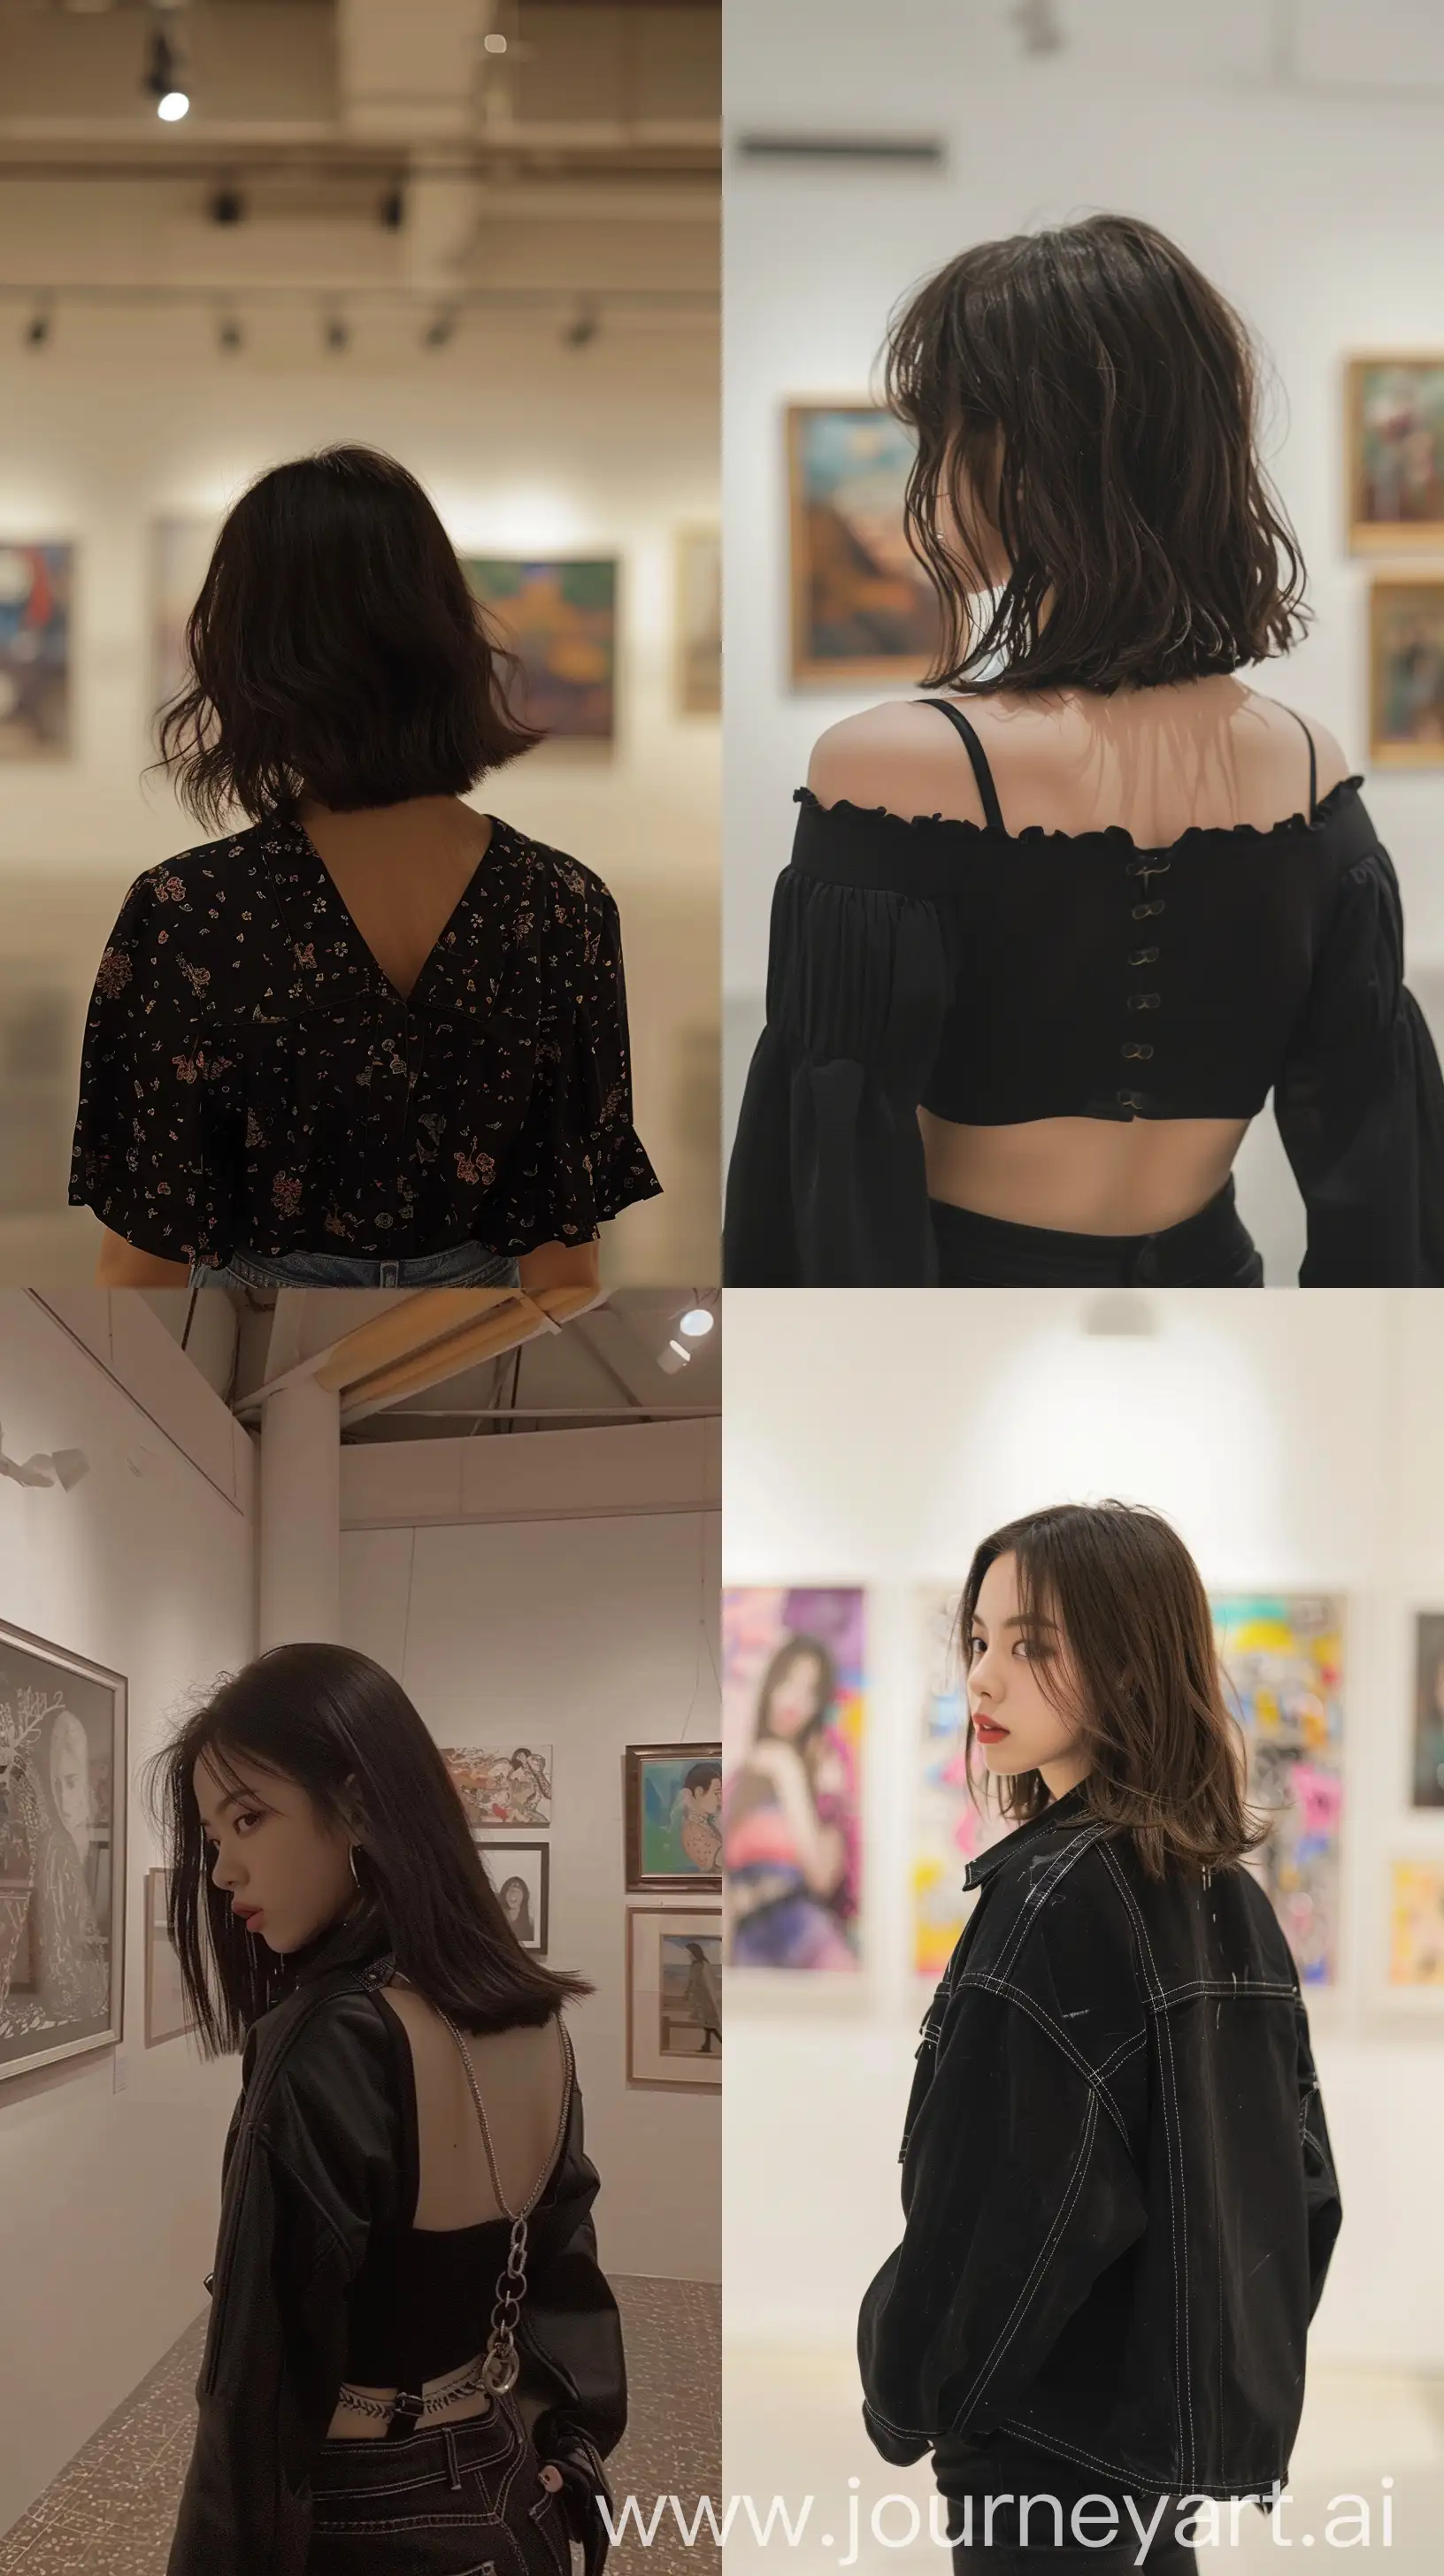 Jennie-from-BLACKPINK-with-Medium-Hair-Poses-in-Art-Gallery